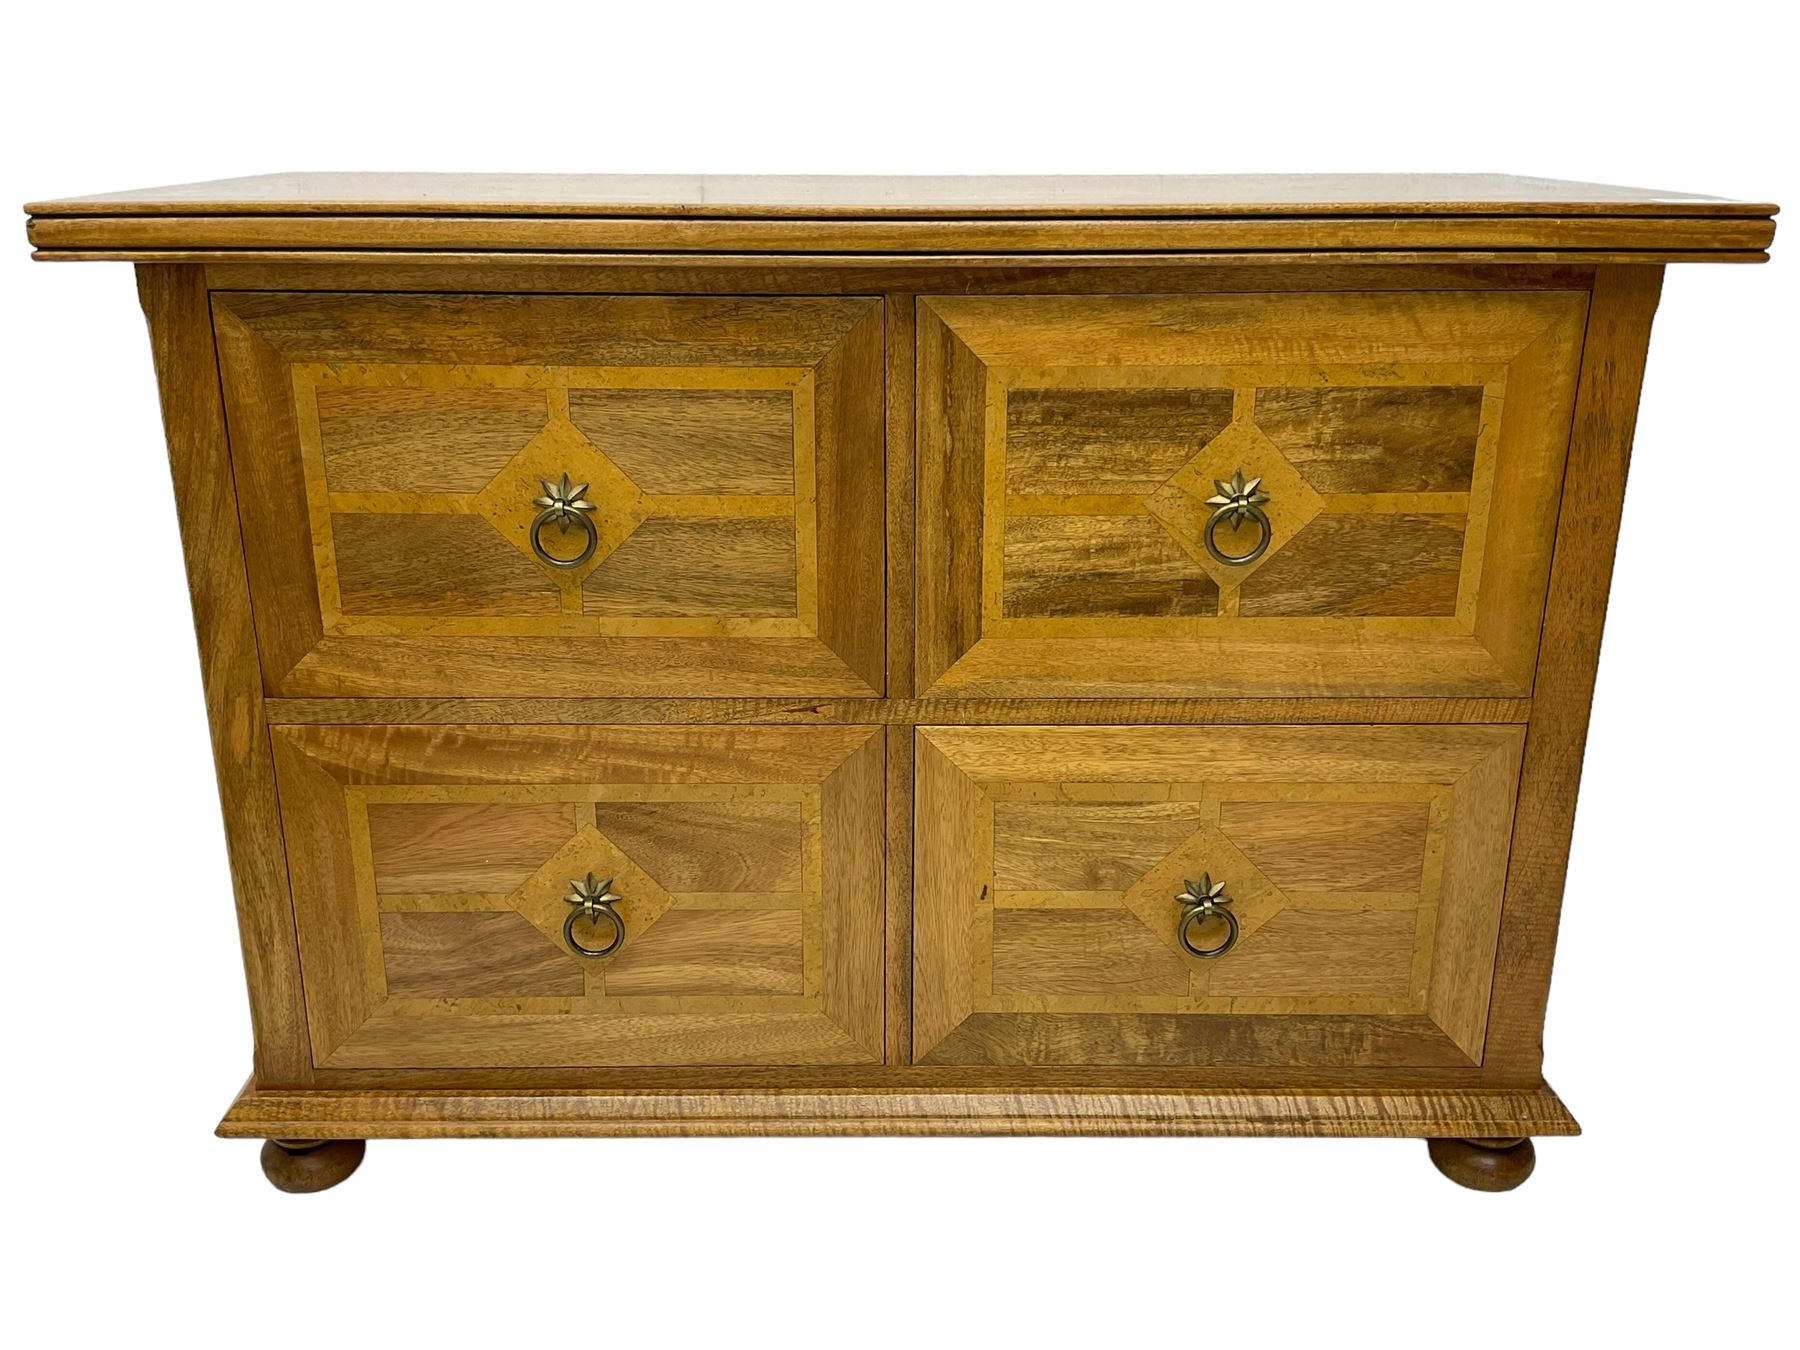 Barker & Stonehouse - flagstone chest fitted with four drawers - Image 5 of 5